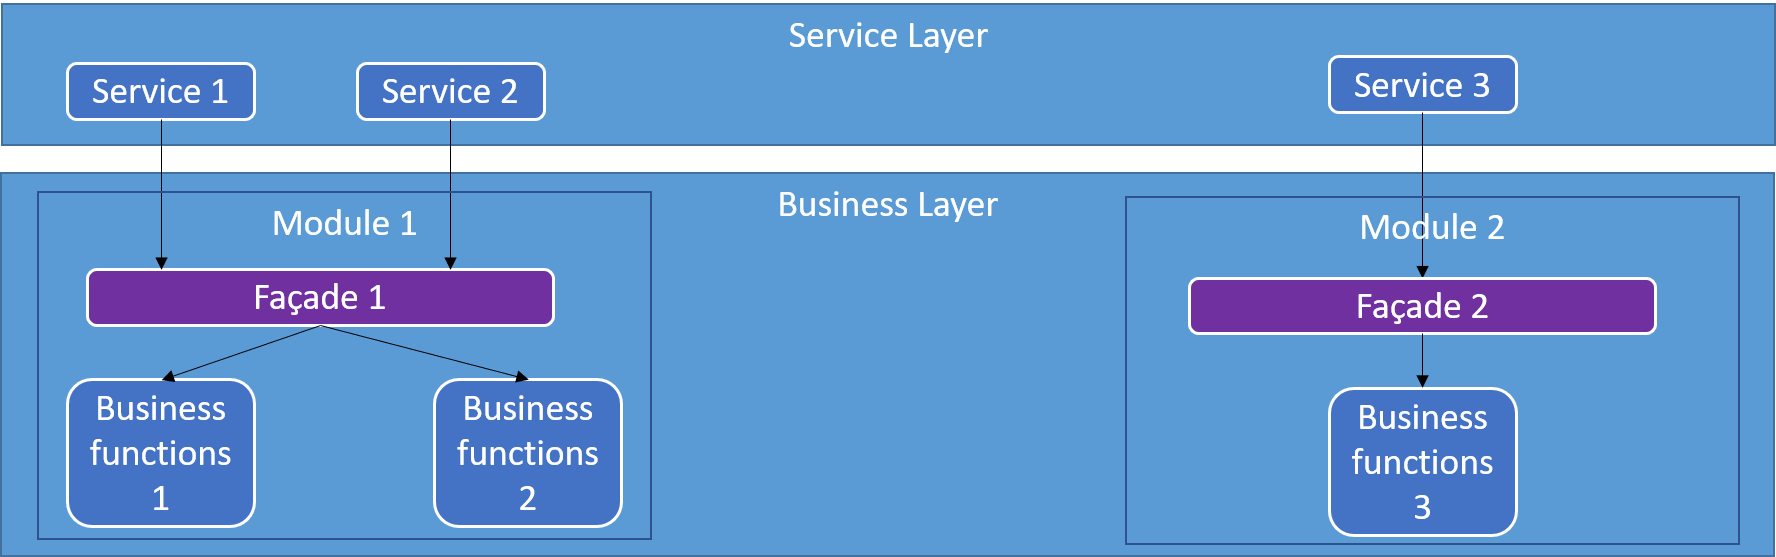 businesslayer-modules.png